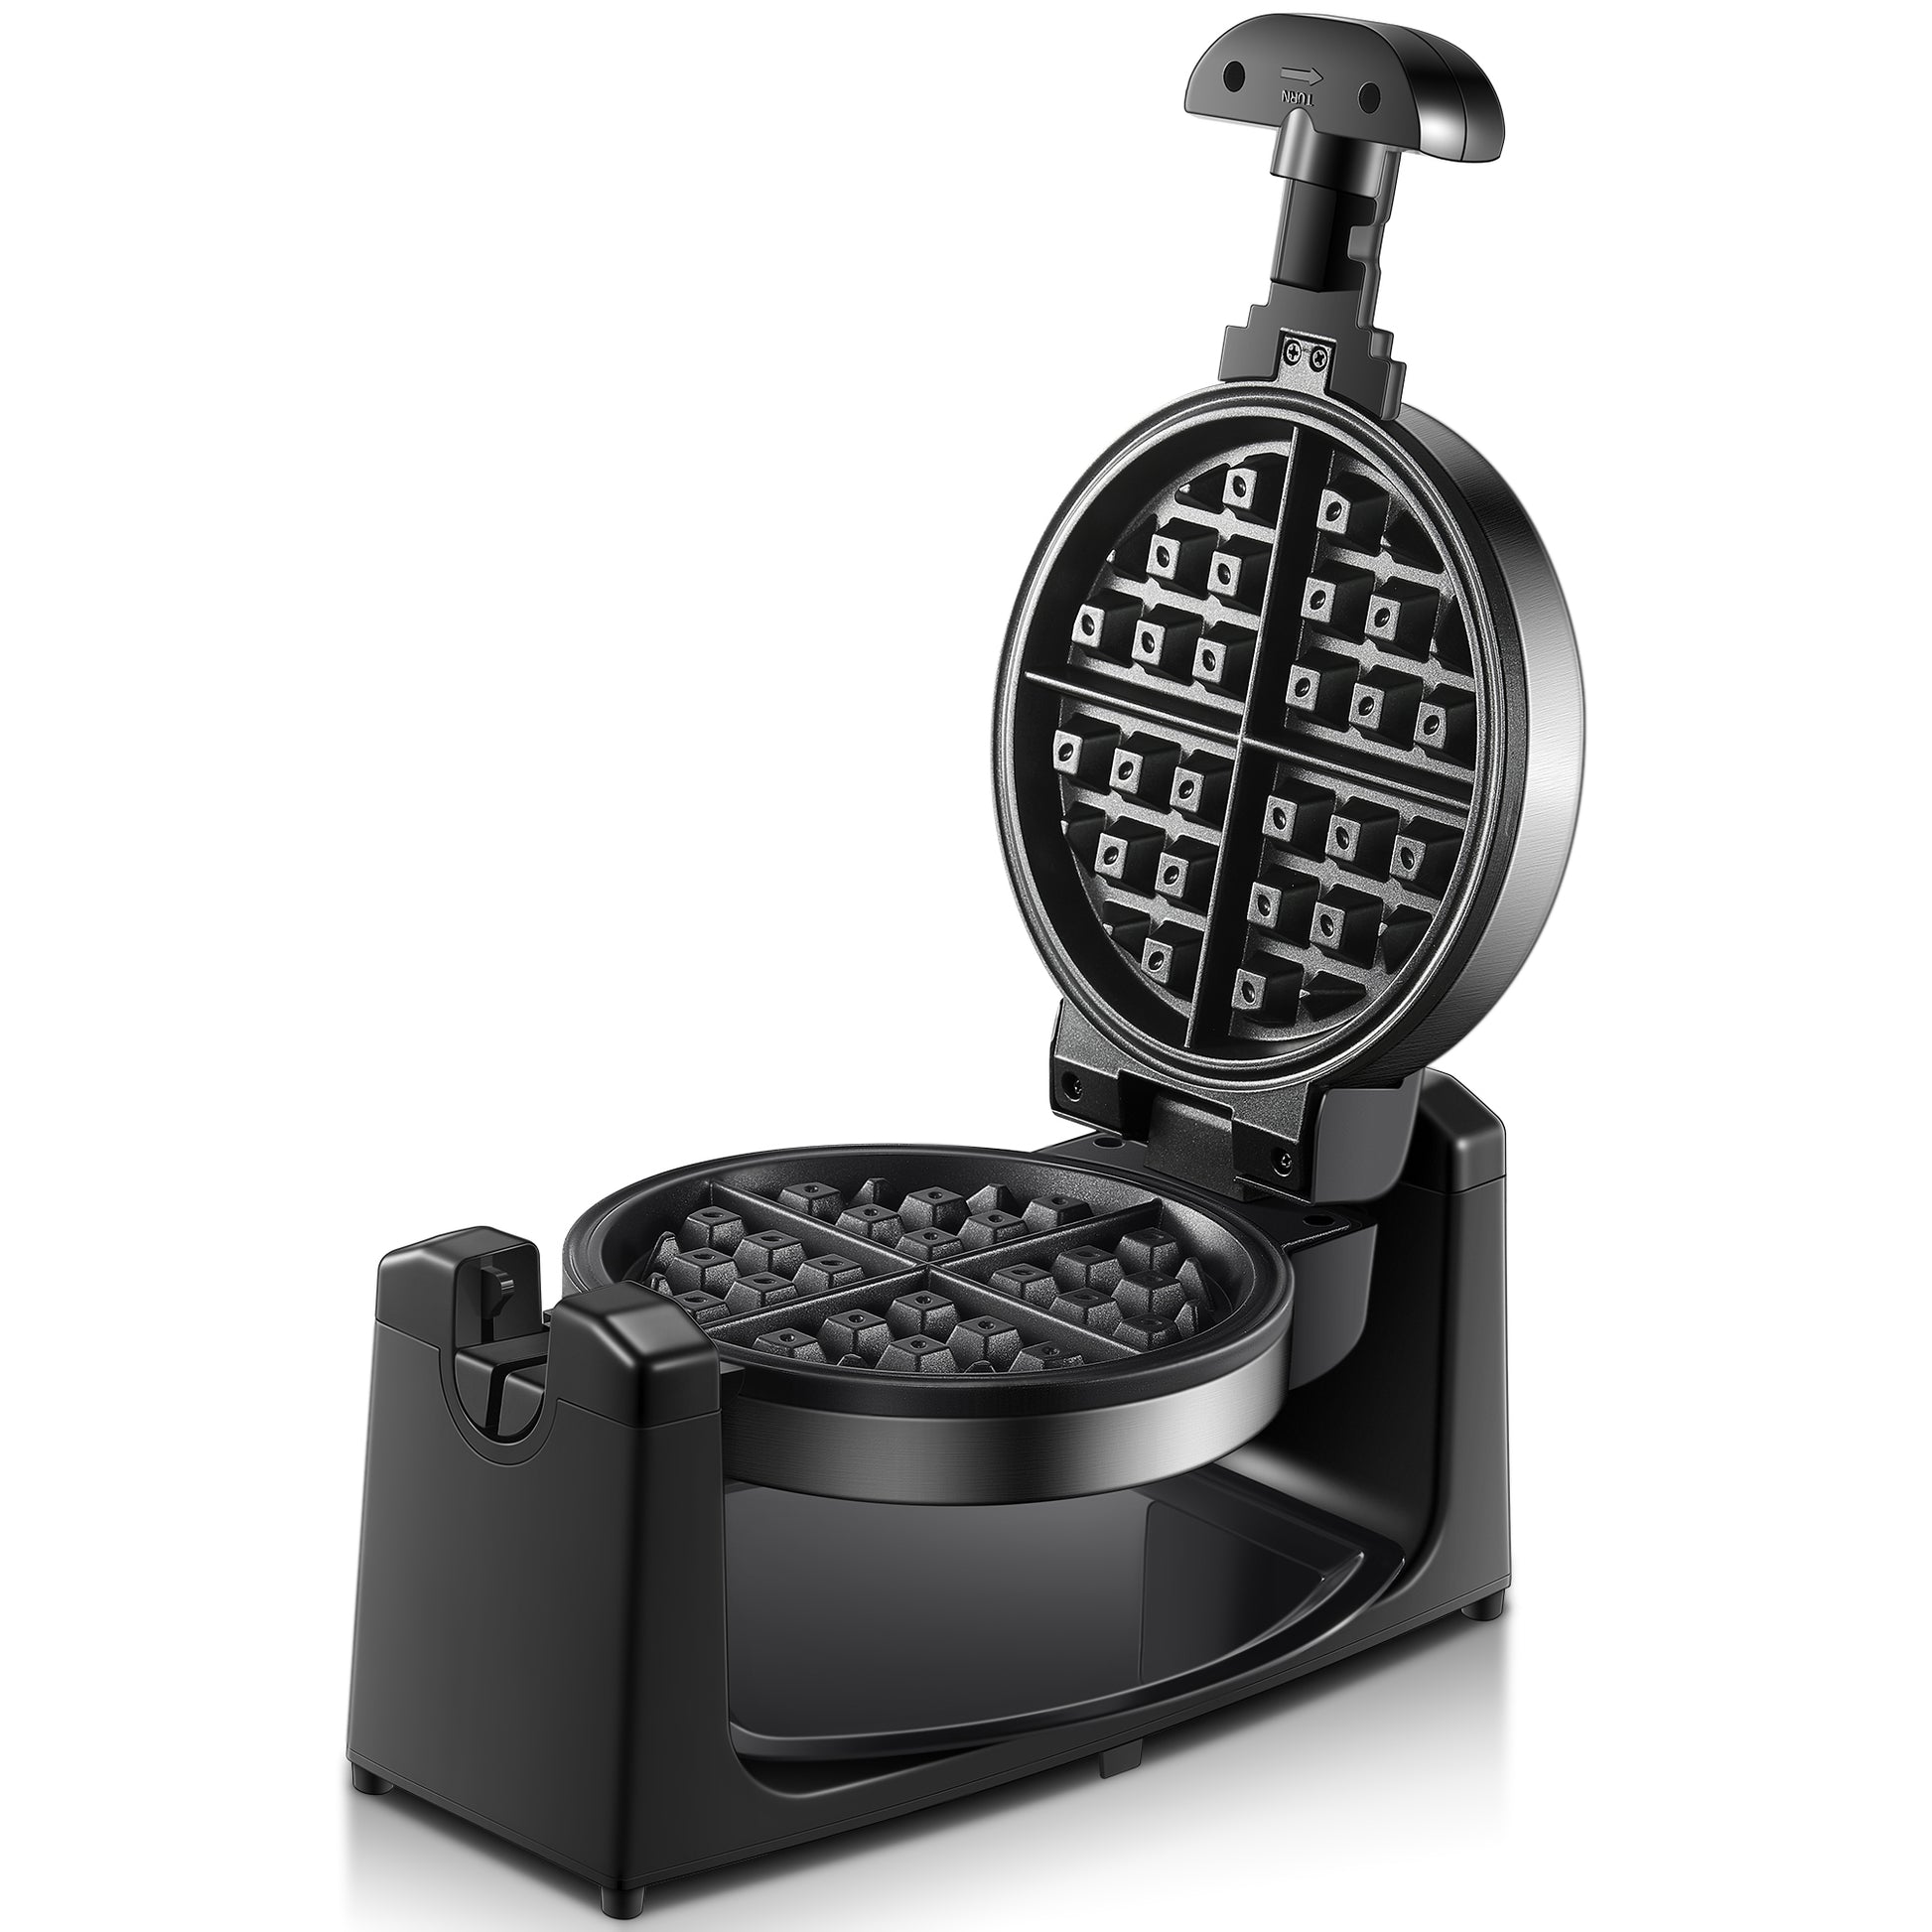 AICOOK 180° Flip Belgian Waffle Maker with Non Stick Grids, Adjustable Browning Temperature Control, Removable Drip Tray, 4-Slice Waffle Iron, Stainless Steel, Indicator Lights, Round Design, 1100W